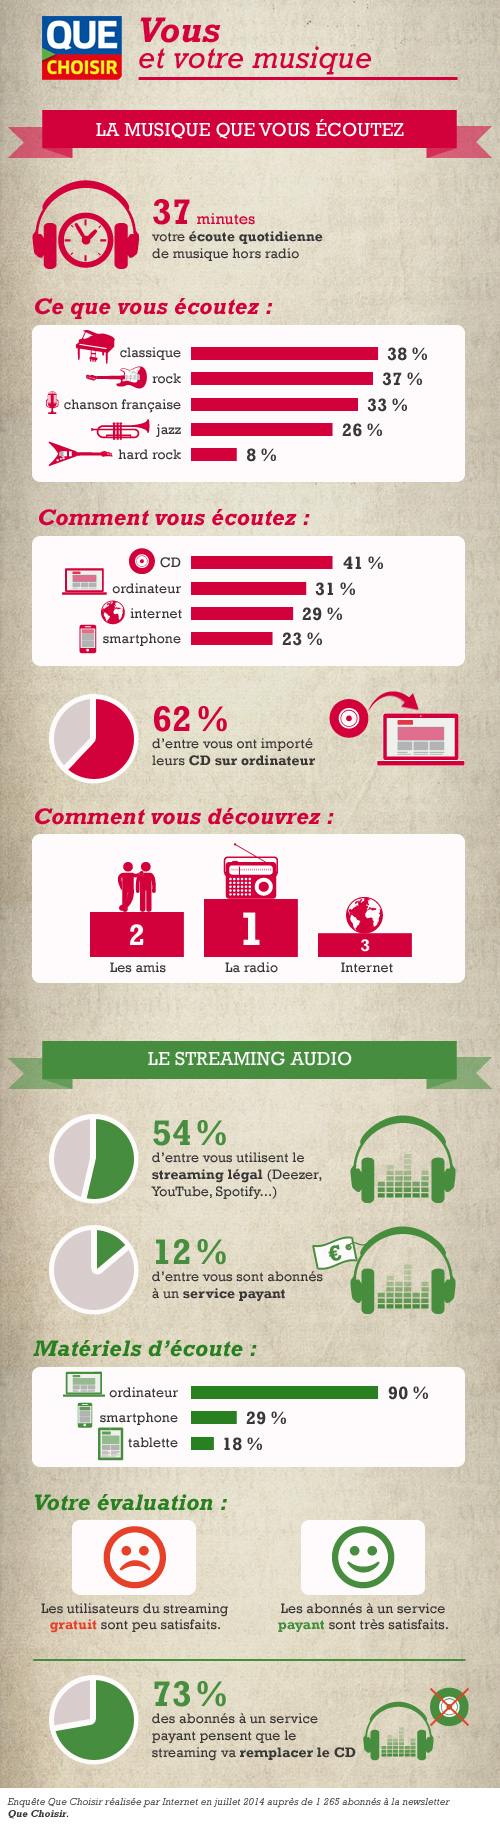 infographie-musique-et-streaming